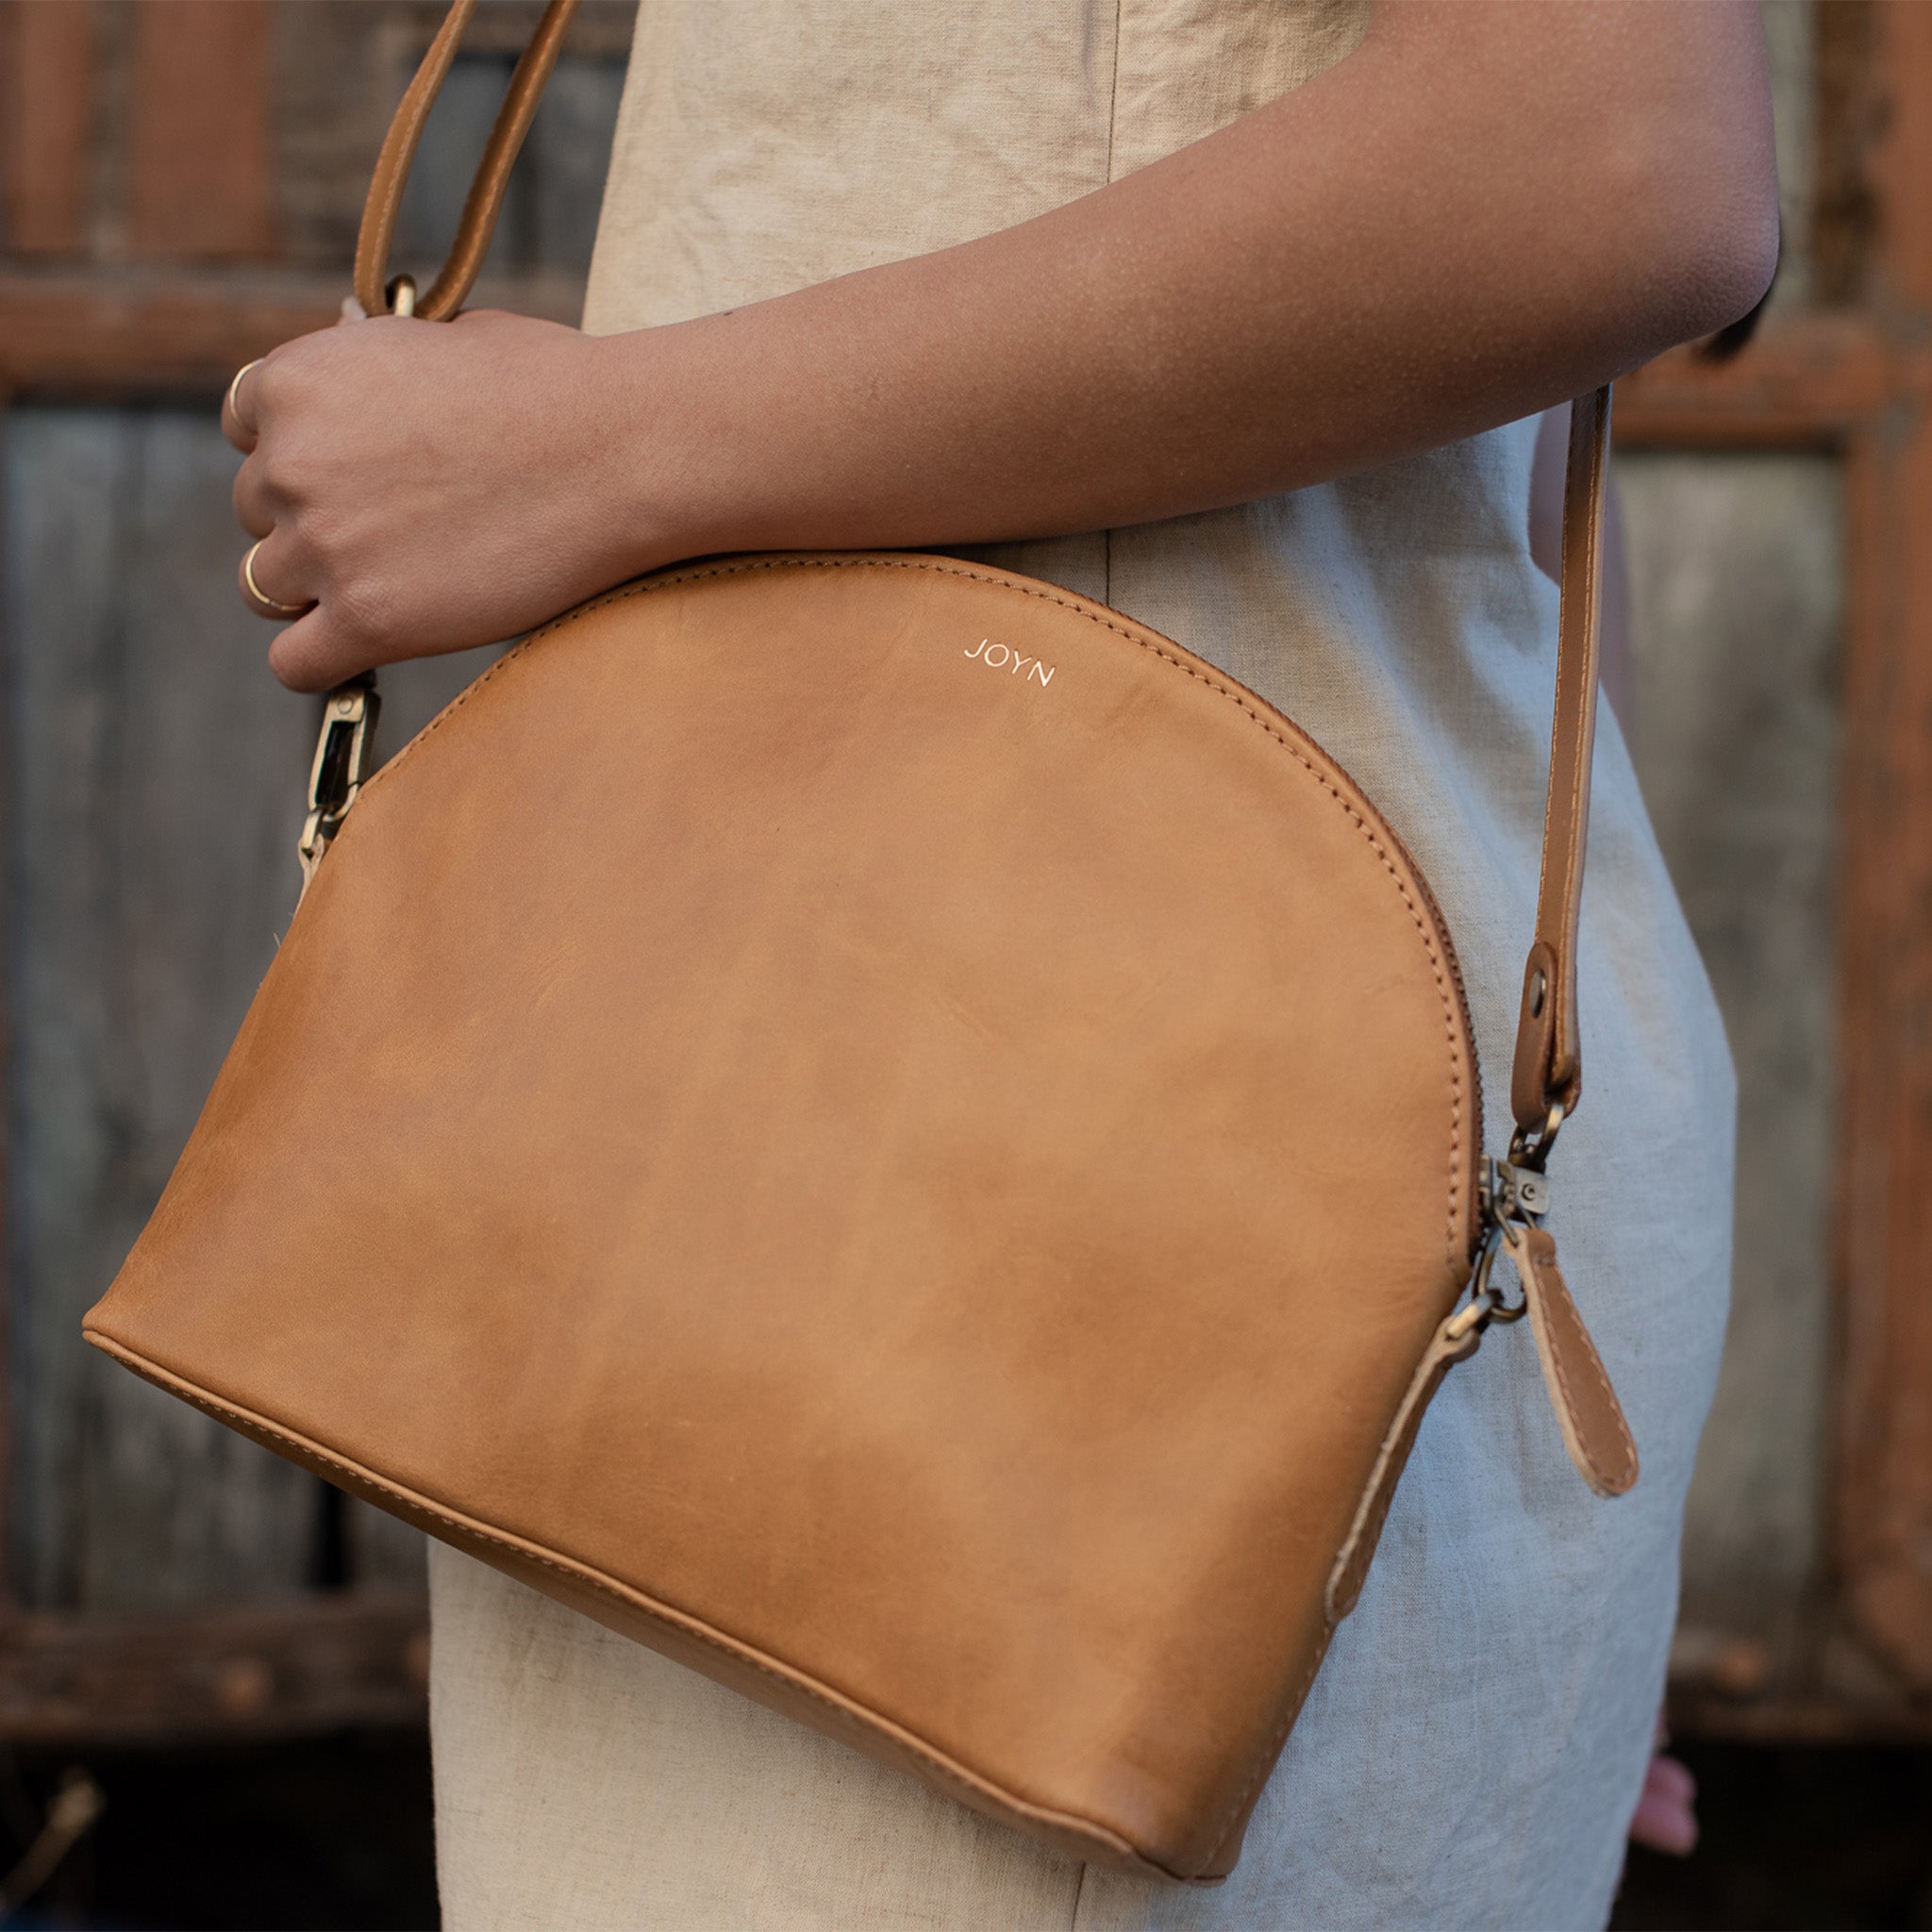 A.P.C, DEMI LUNE / HALF MOON Shoulder Bag, Quick Review & What Is In My  Bag